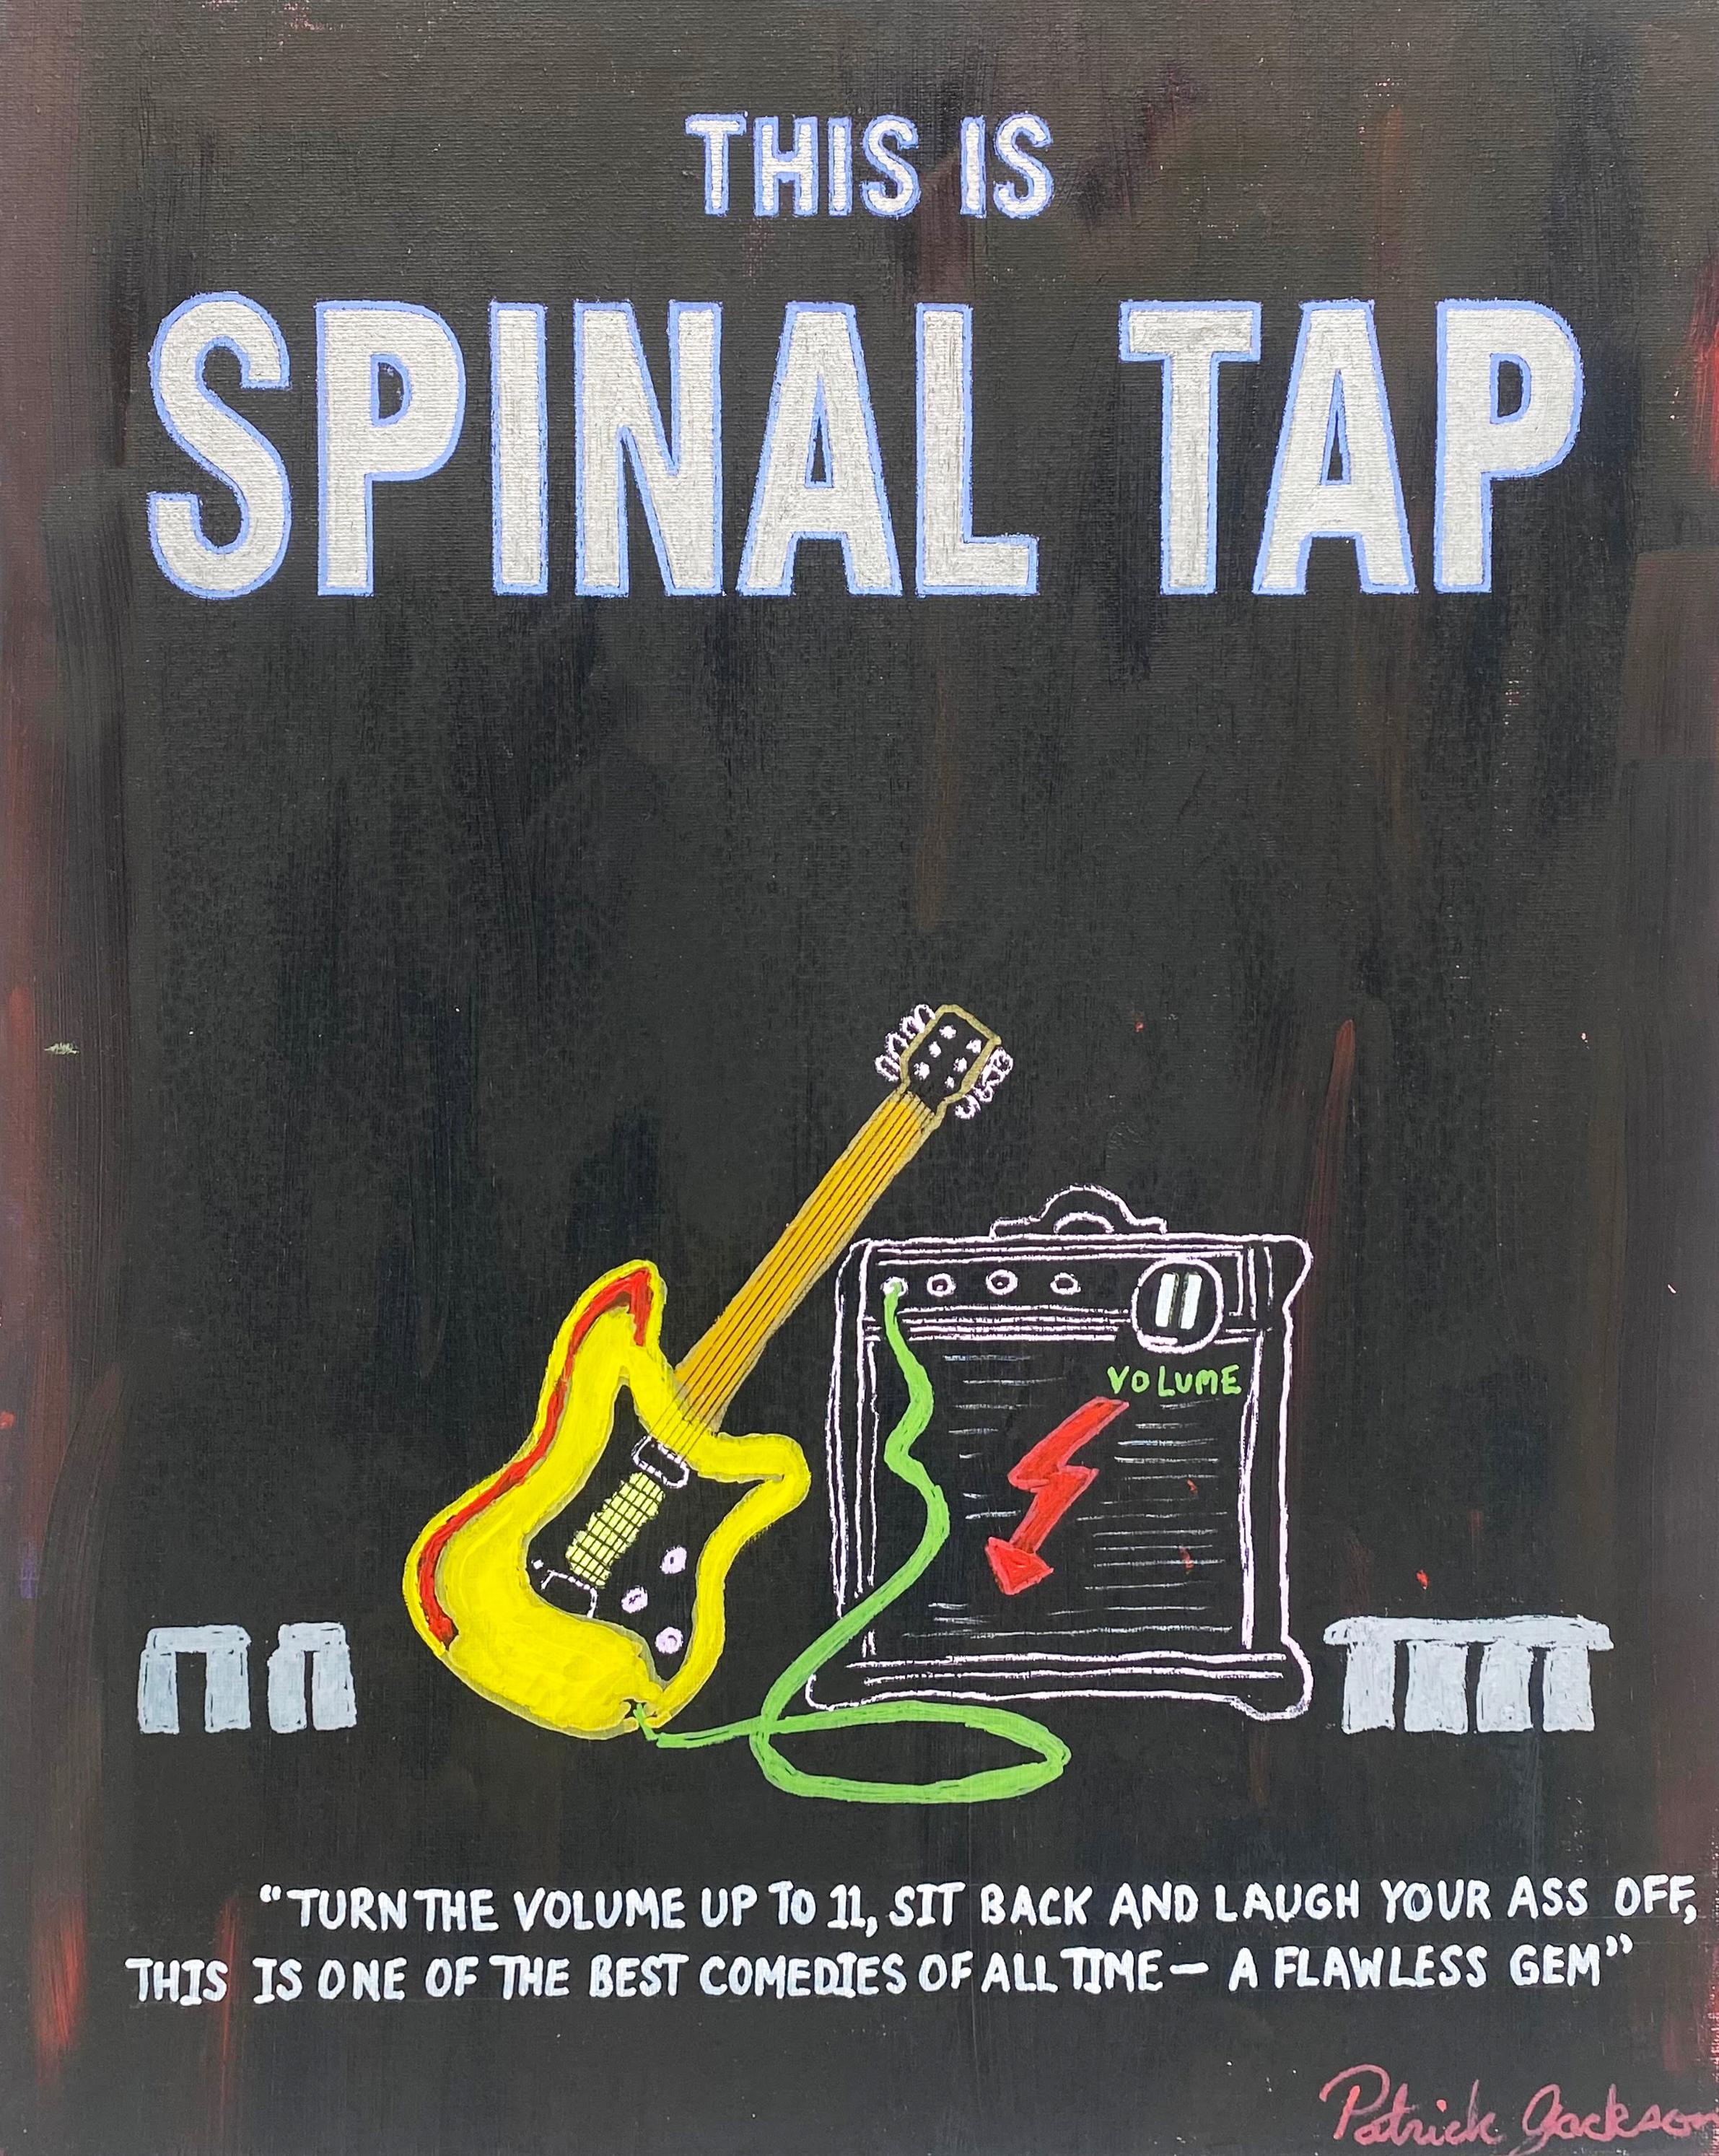 Patrick Jackson Figurative Painting - This is Spinal Tap